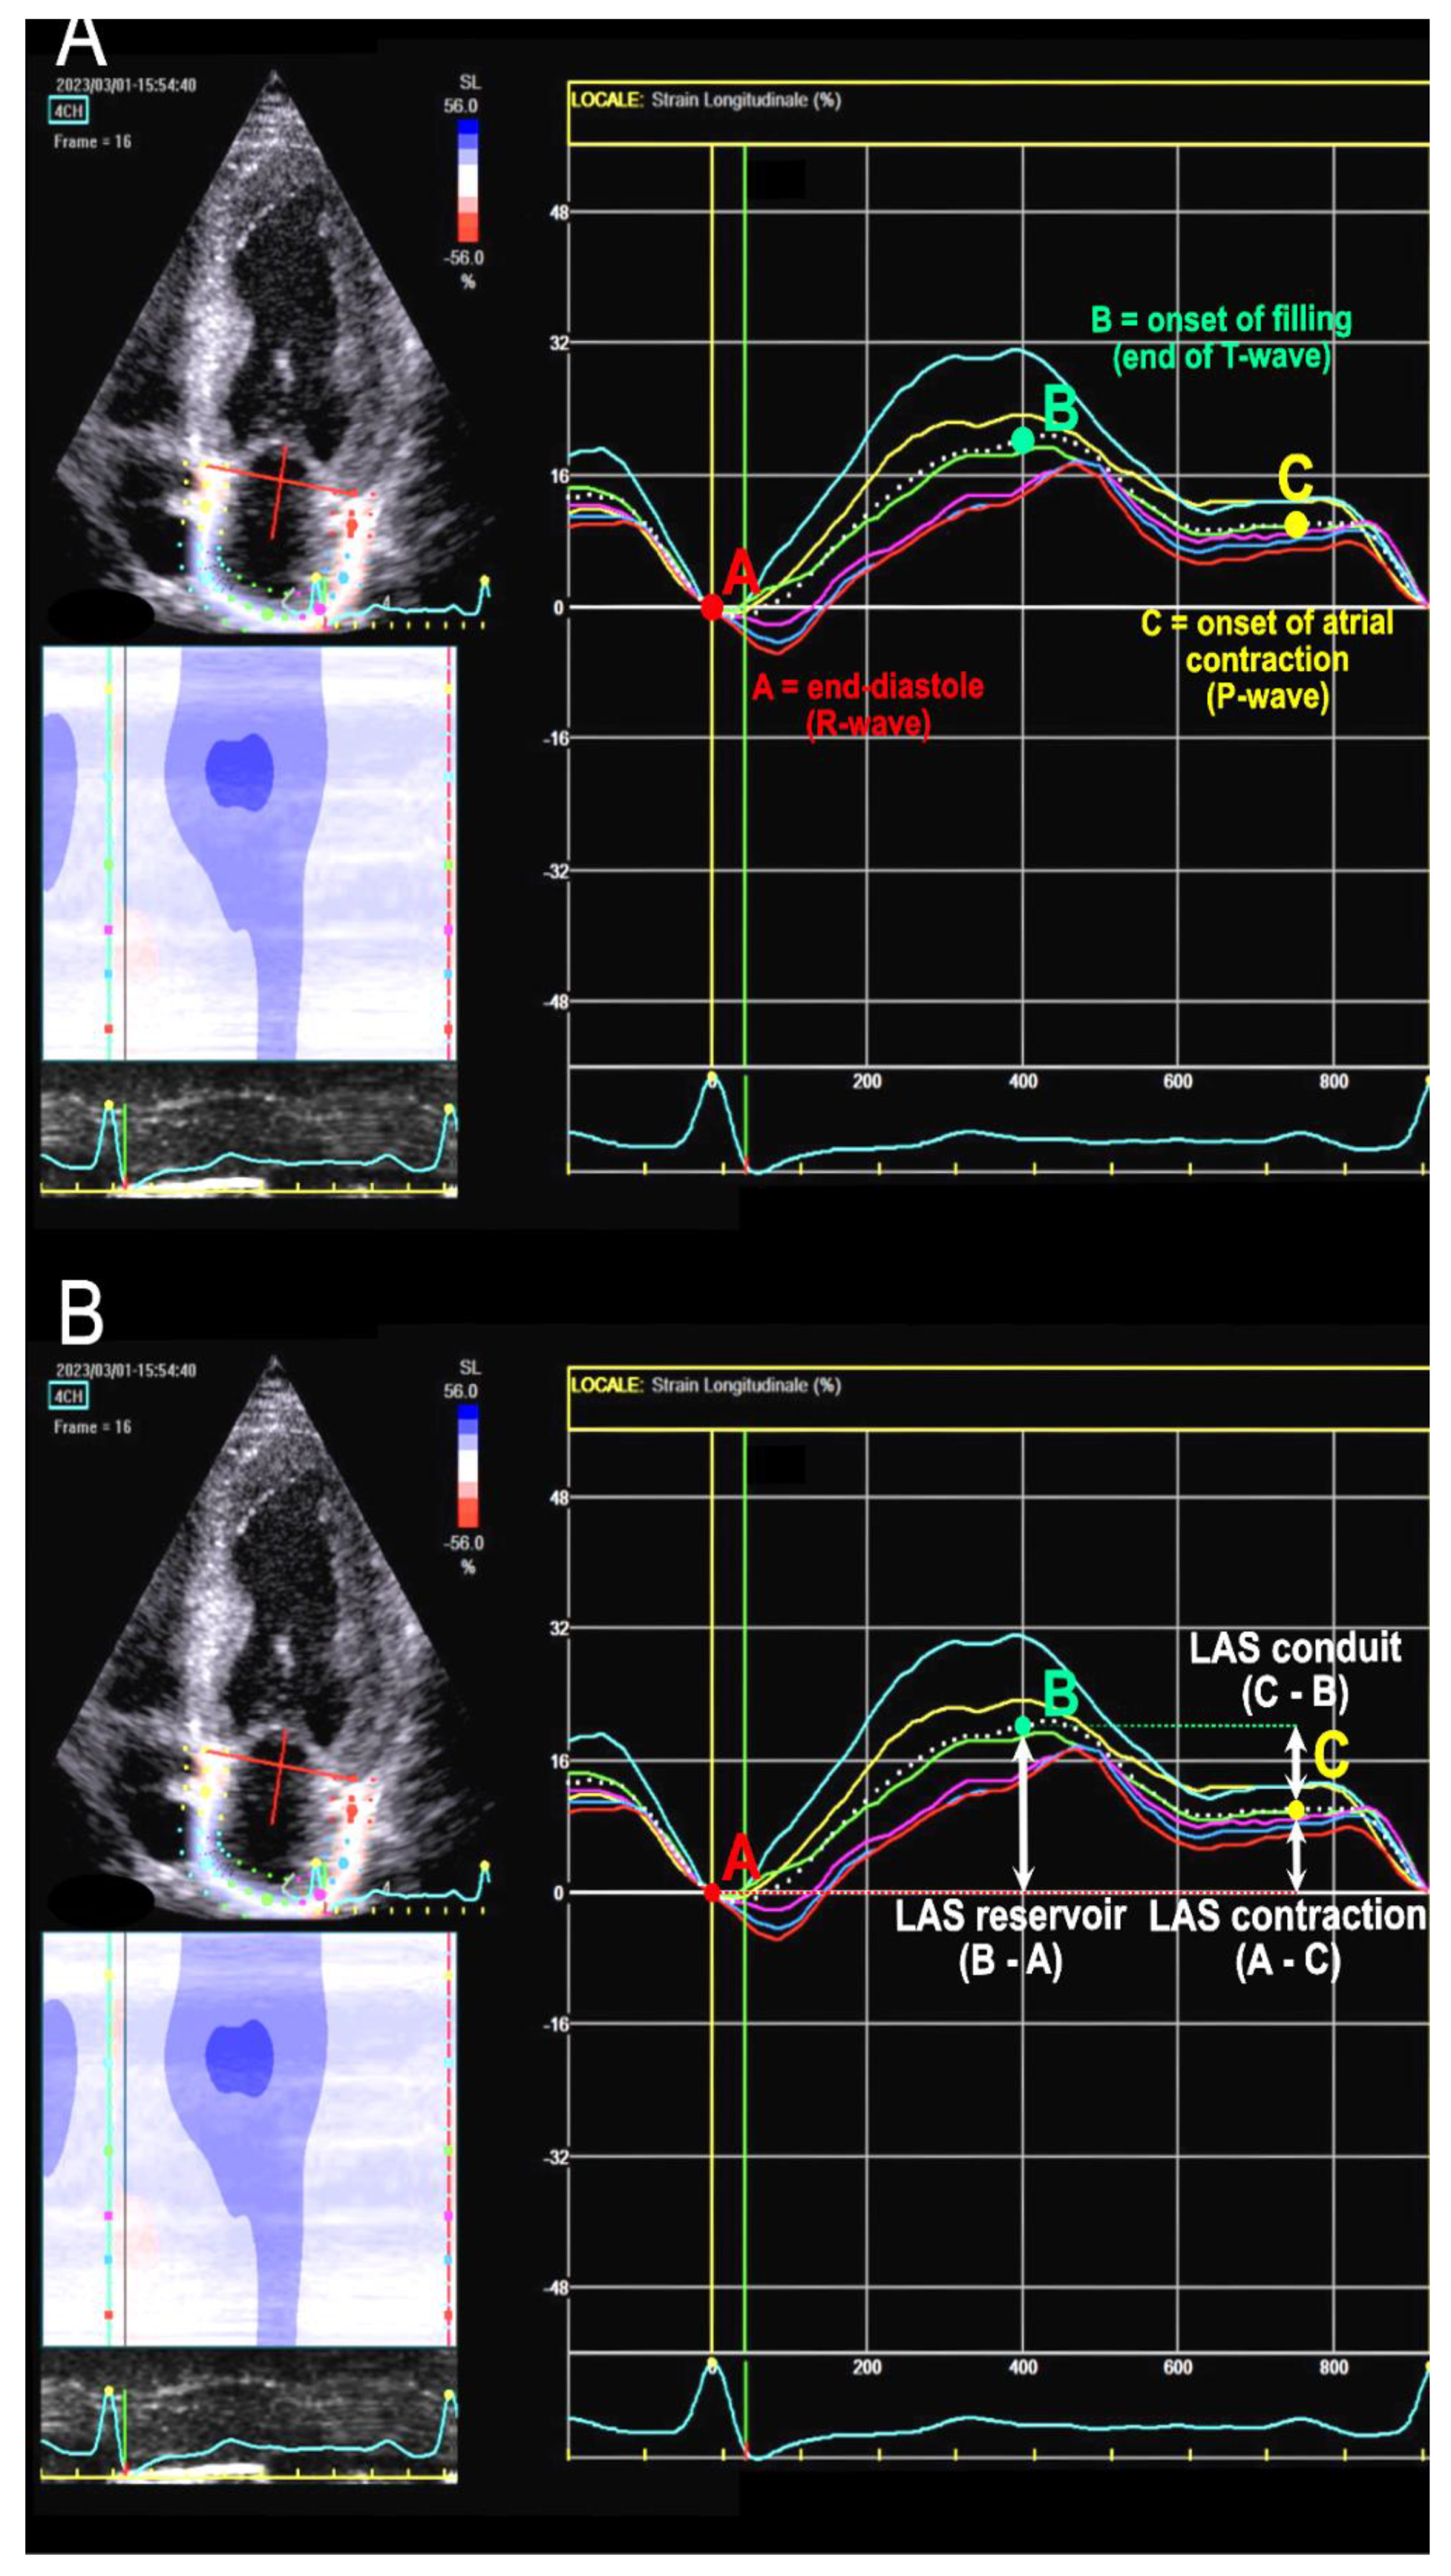 Speckle-Tracking Imaging, Principles and Clinical Applications: A Review  for Clinical Cardiologists